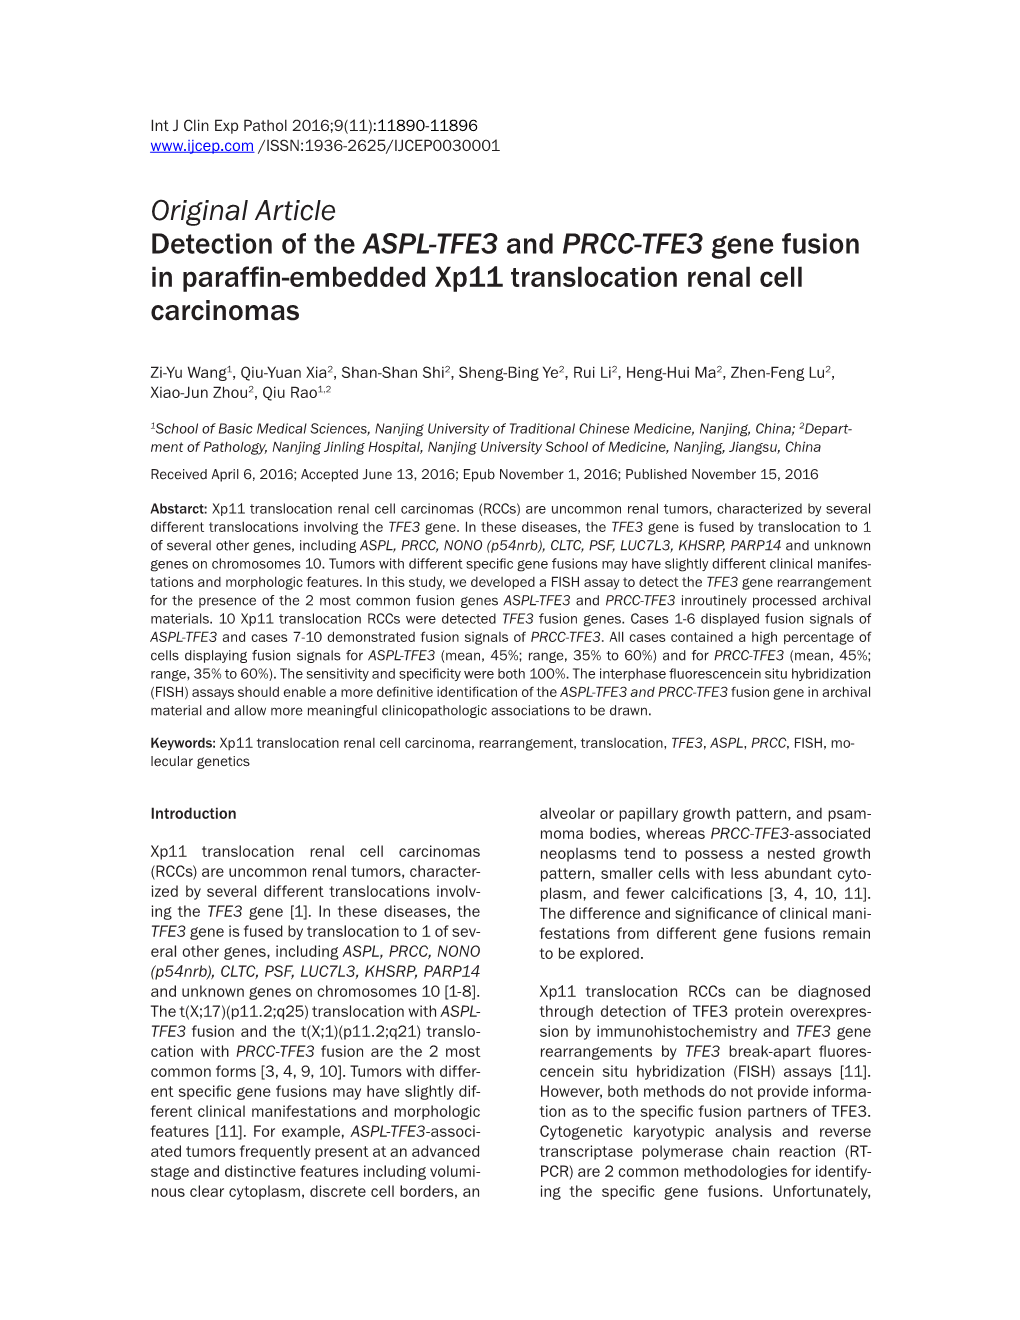 Original Article Detection of the ASPL-TFE3 and PRCC-TFE3 Gene Fusion in Paraffin-Embedded Xp11 Translocation Renal Cell Carcinomas